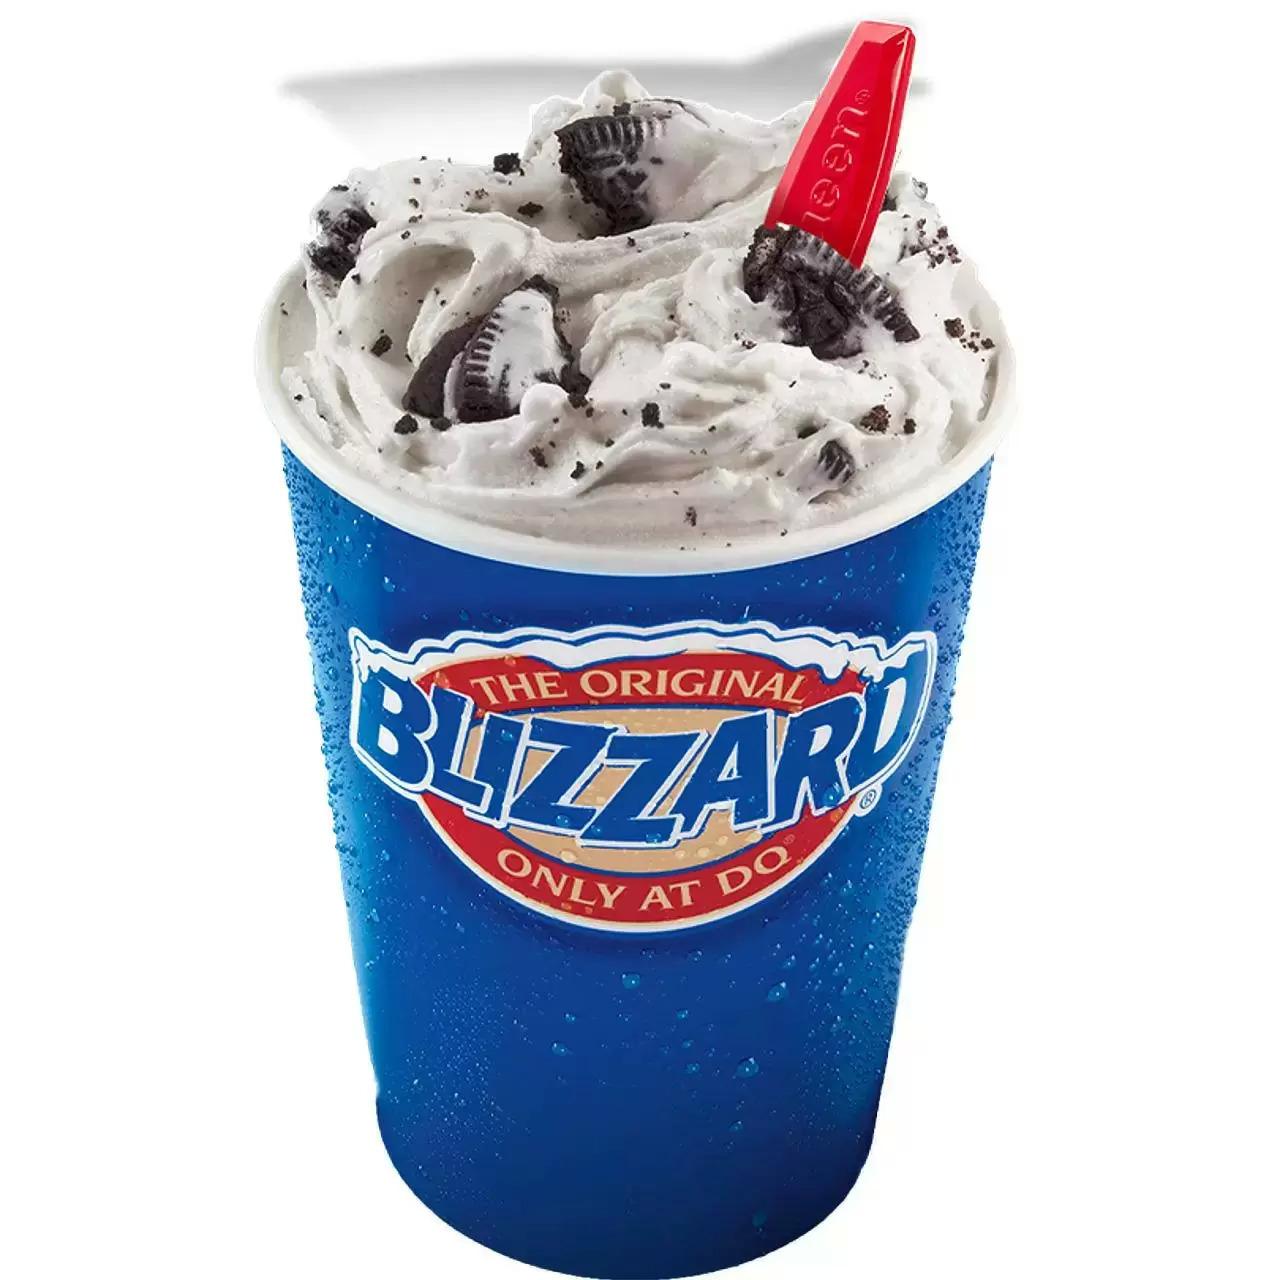 Dairy Queen Small Dairy Queen Blizzard Treat for $0.85